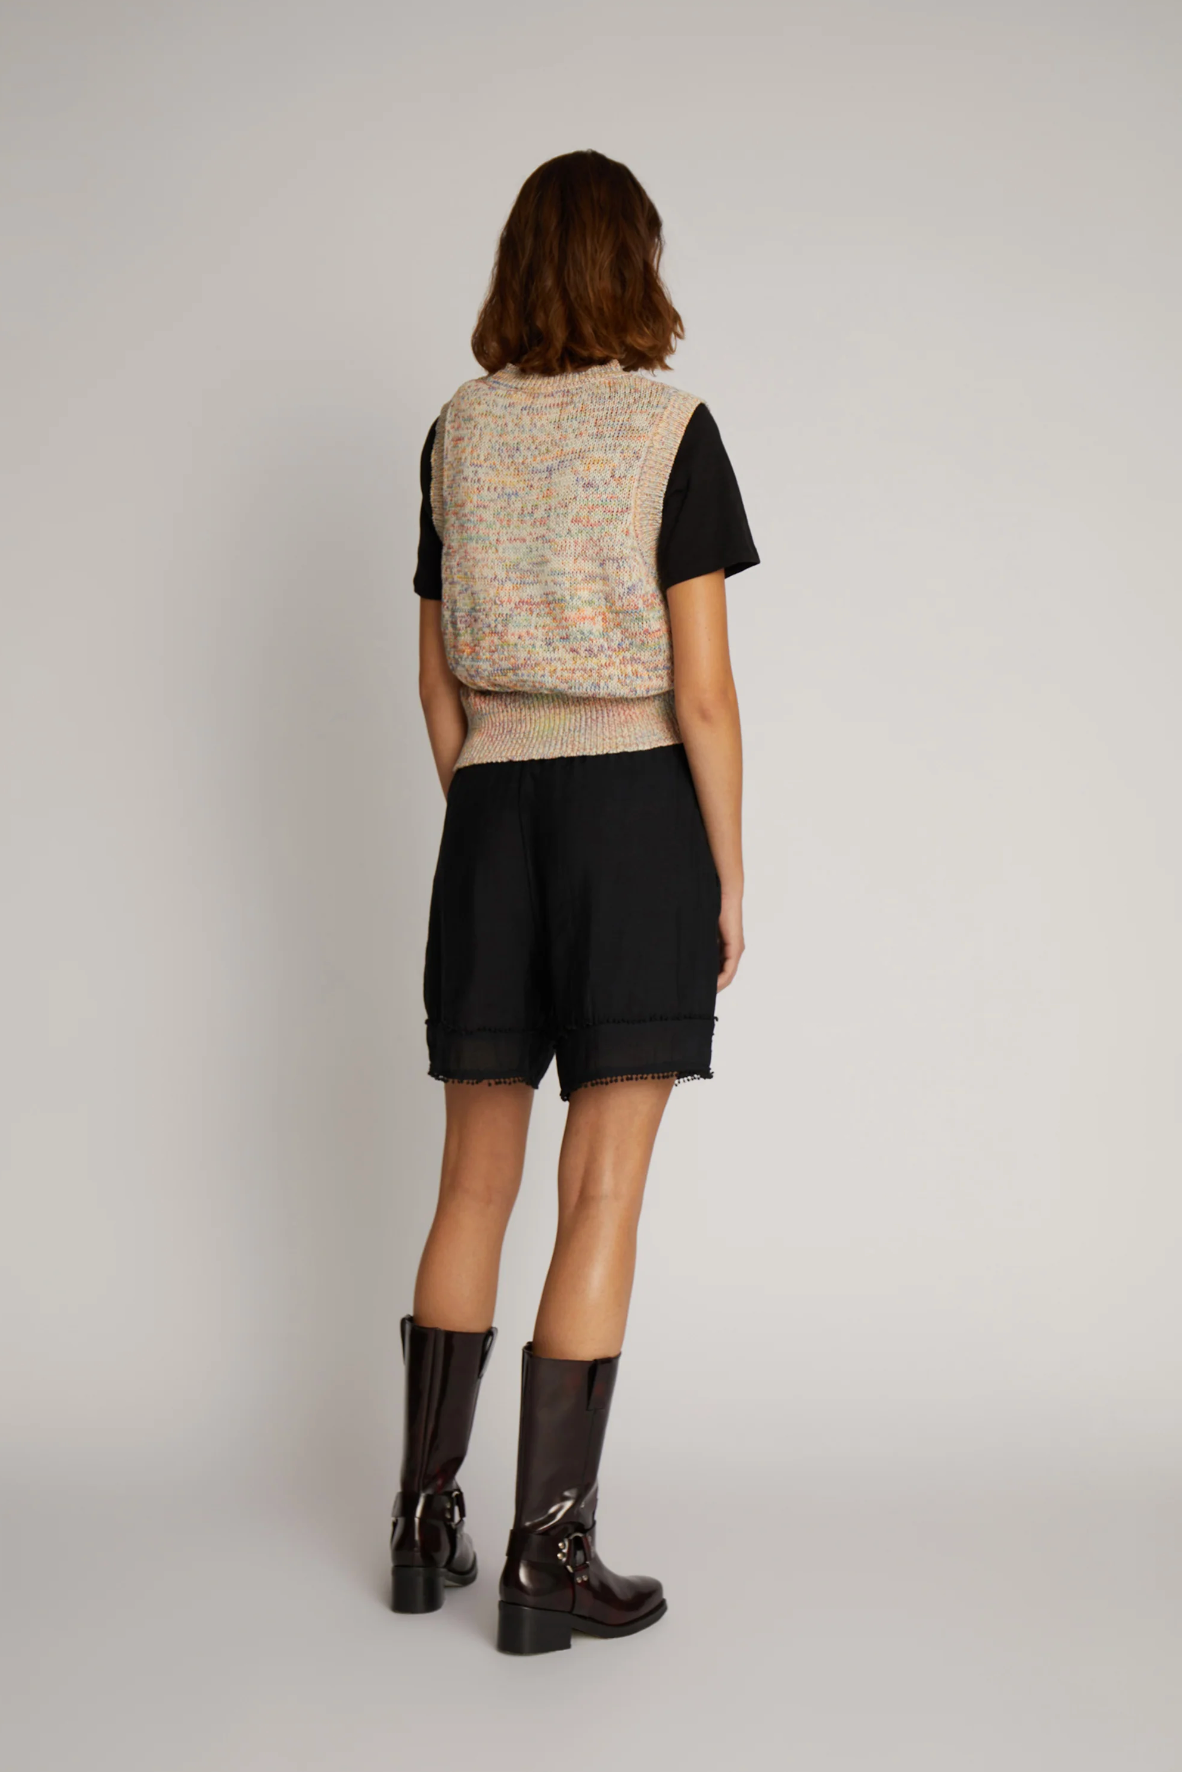 Reverse view of image of woman wearing black shorts and t-shirt with beige knitted vest